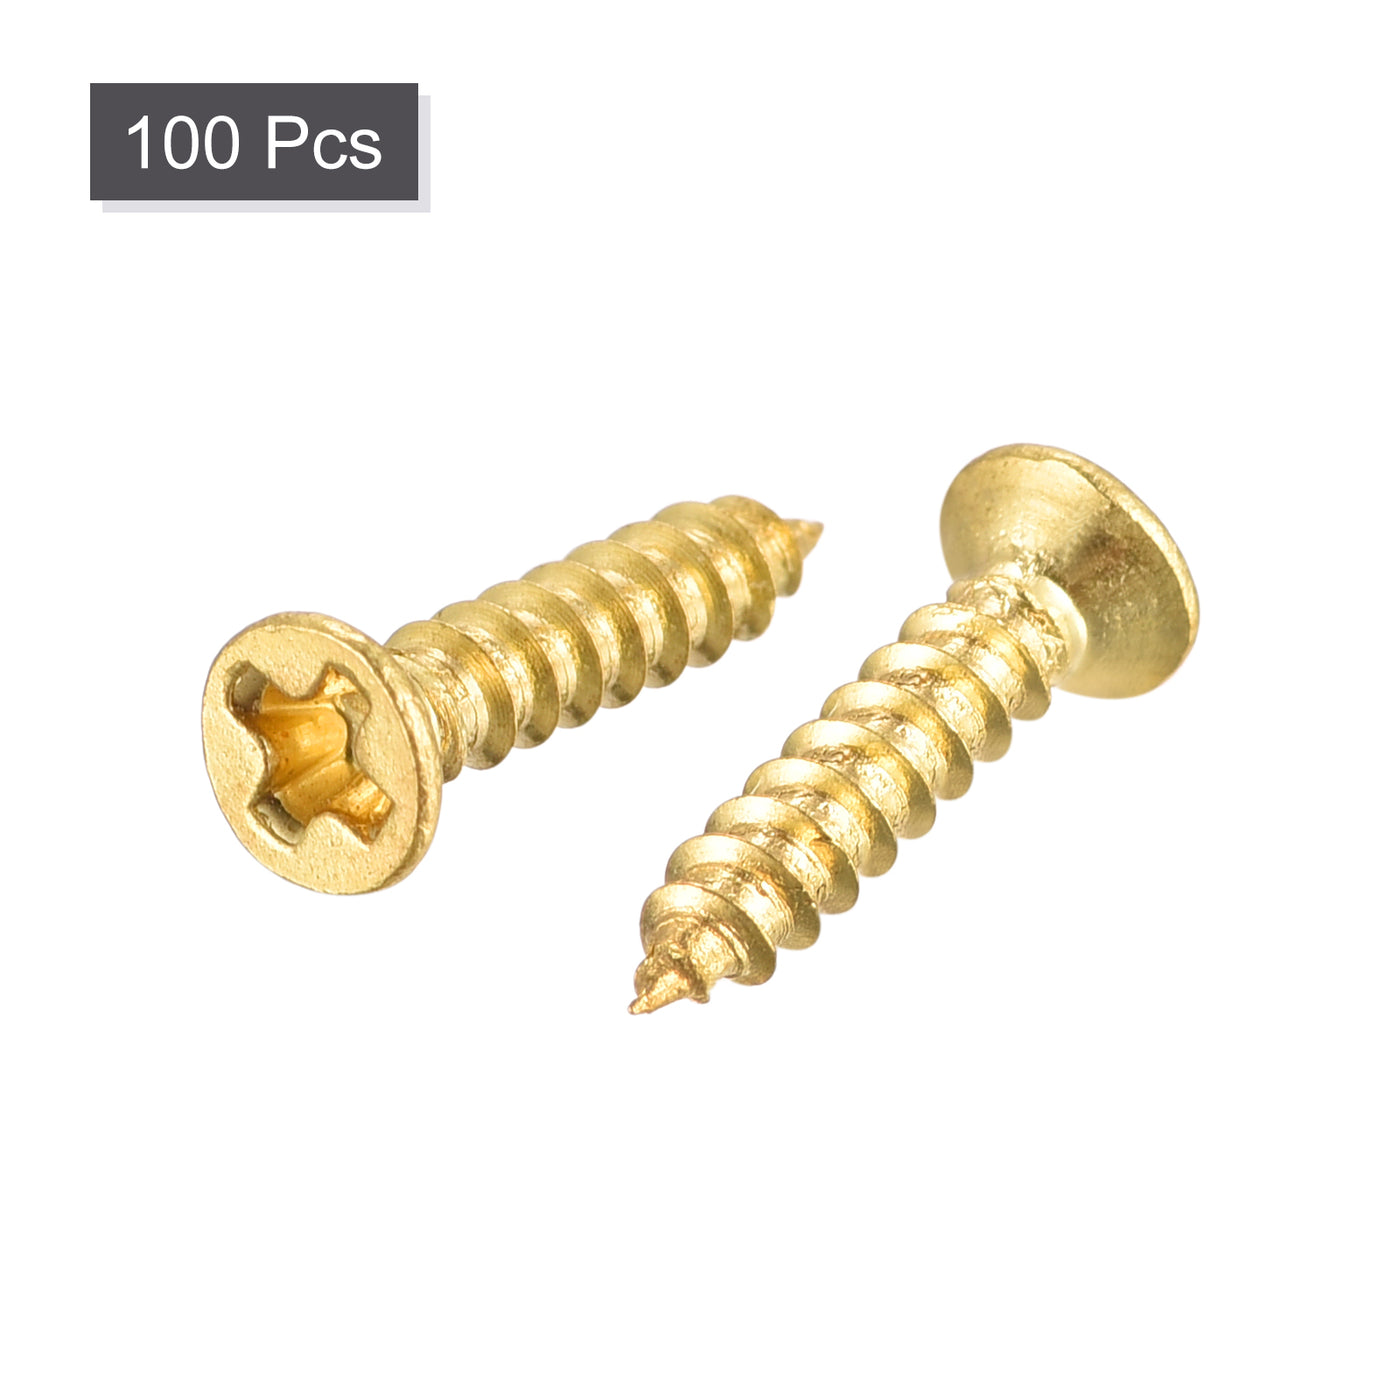 uxcell Uxcell Brass Wood Screws, M2x10mm Phillips Flat Head Self Tapping Connector for Door, Cabinet, Wooden Furniture 100Pcs